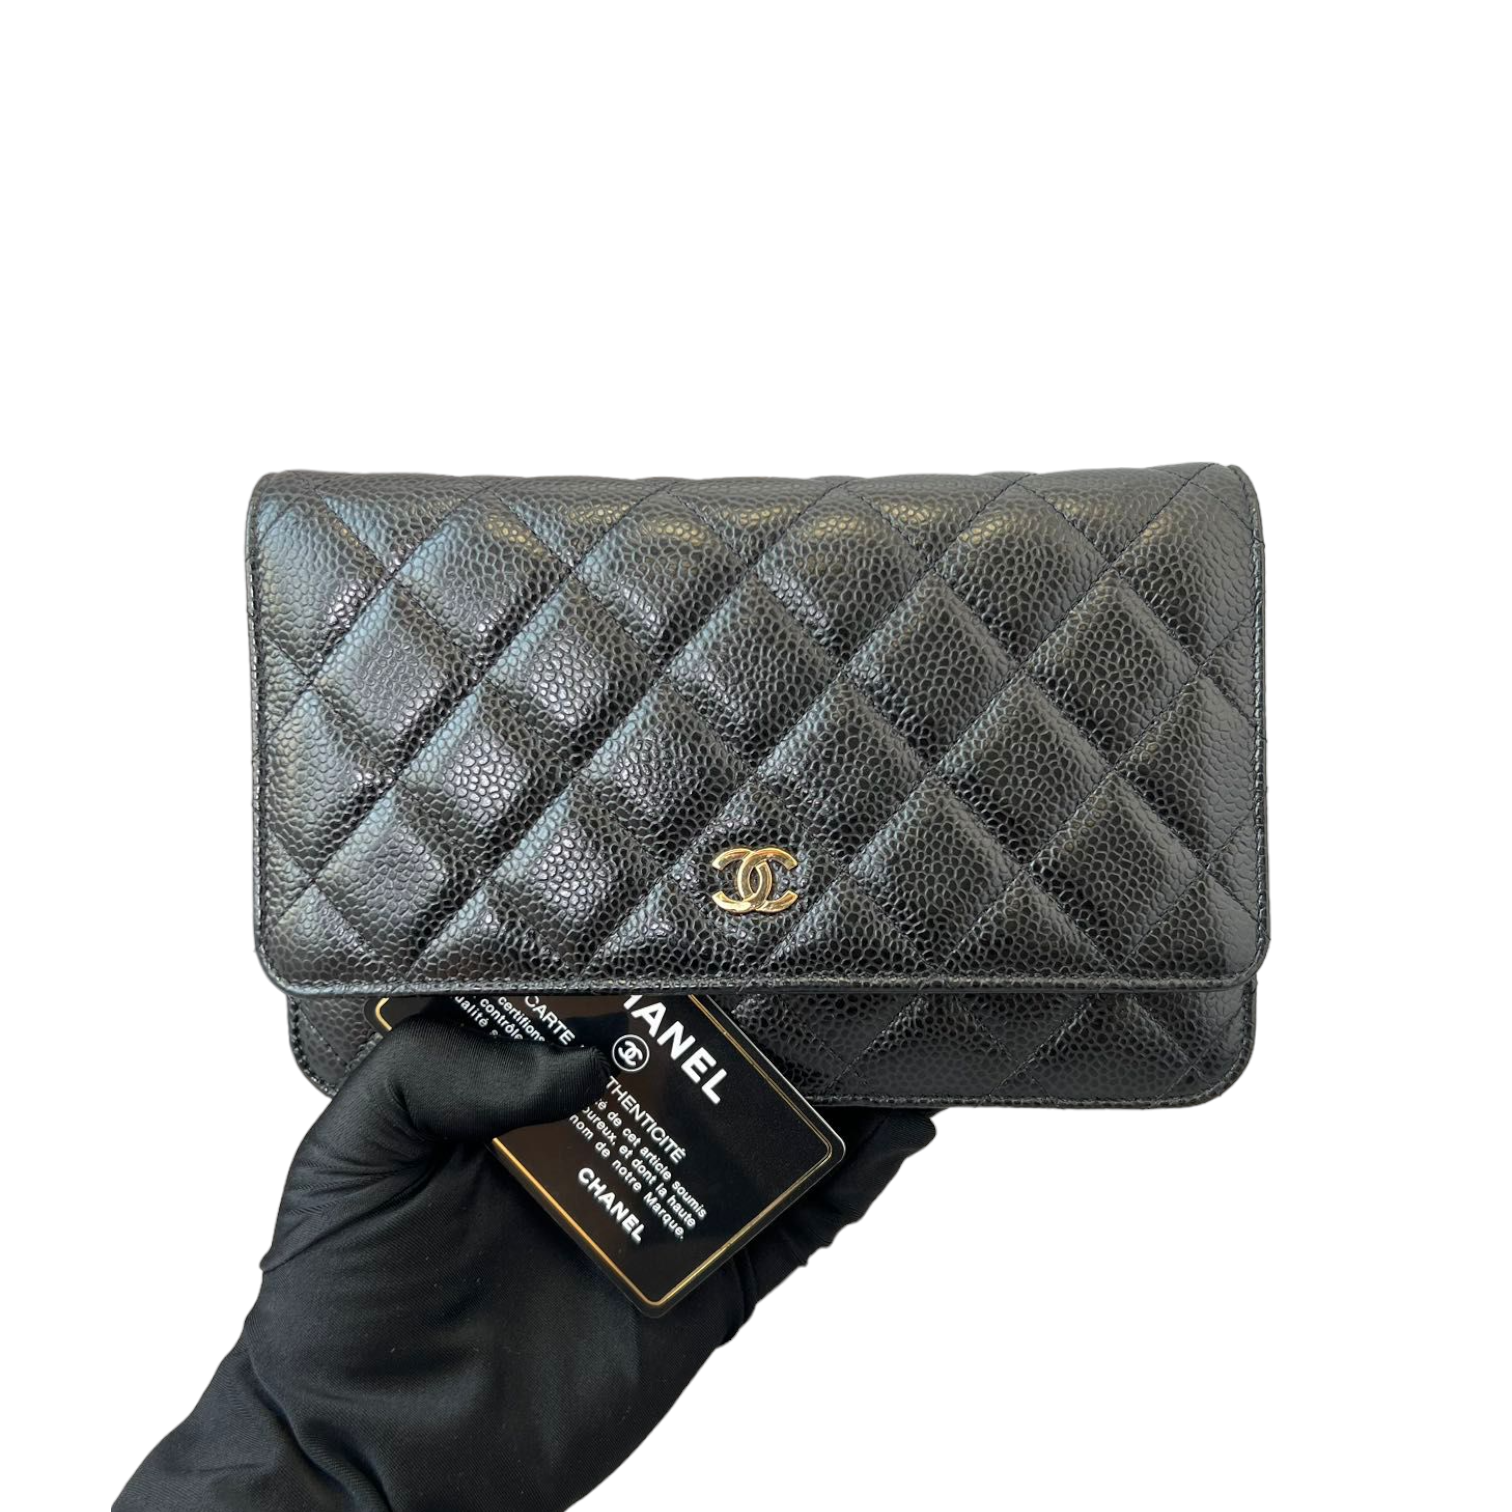 Chanel Black Caviar Leather Gold Hardware New | on Que Style